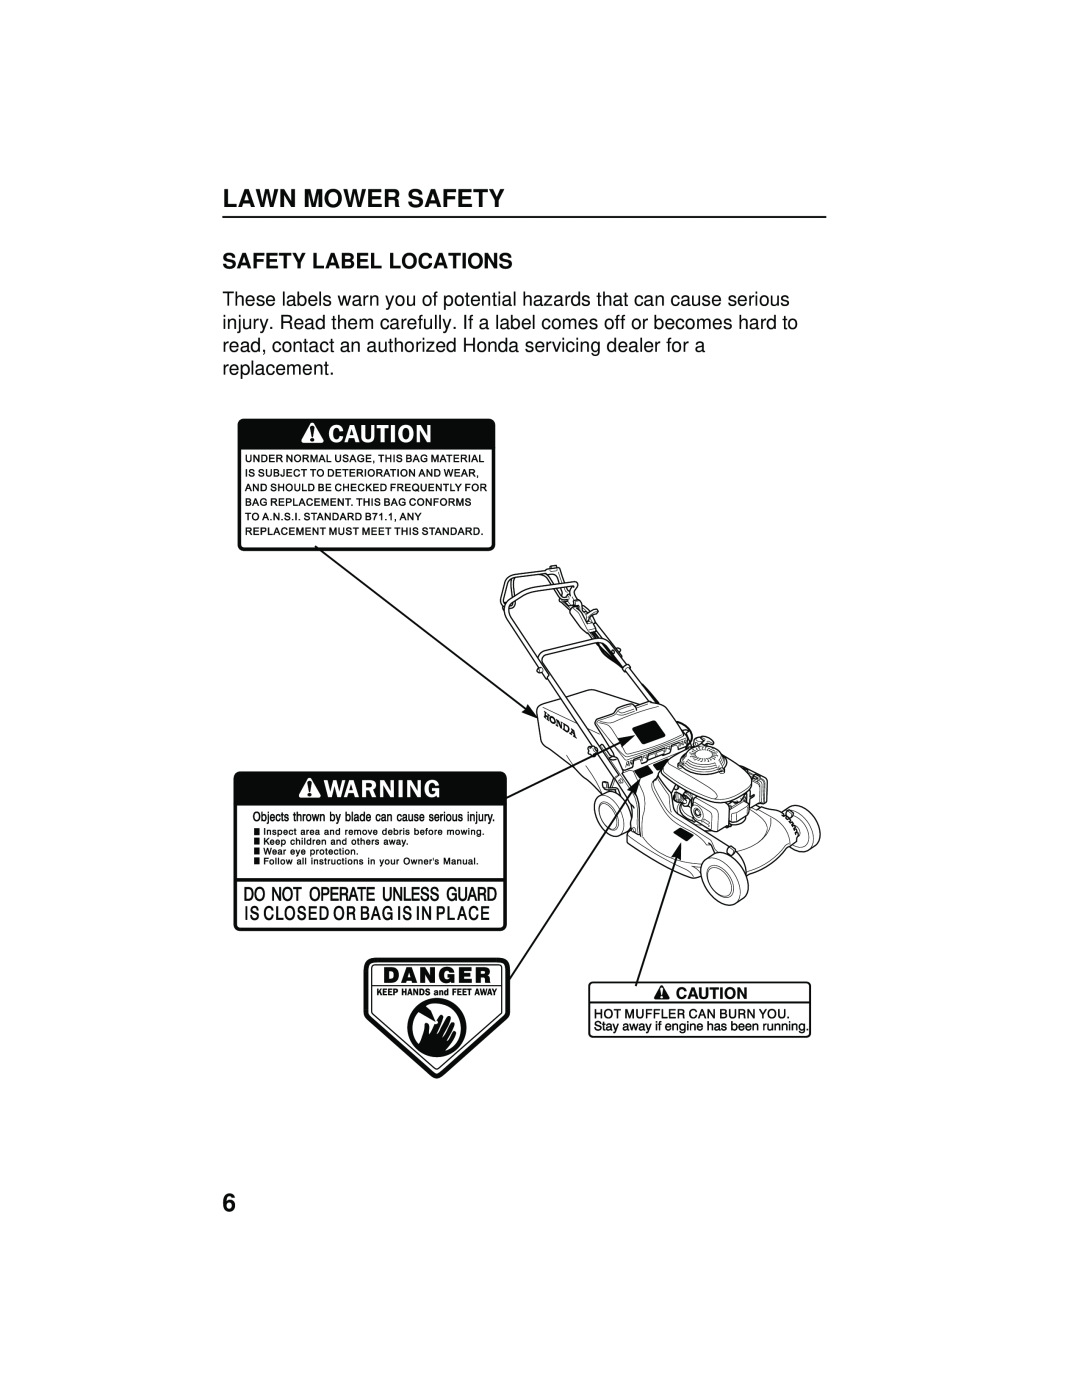 Honda Power Equipment HRB216TXA owner manual Safety Label Locations, Lawn Mower Safety 